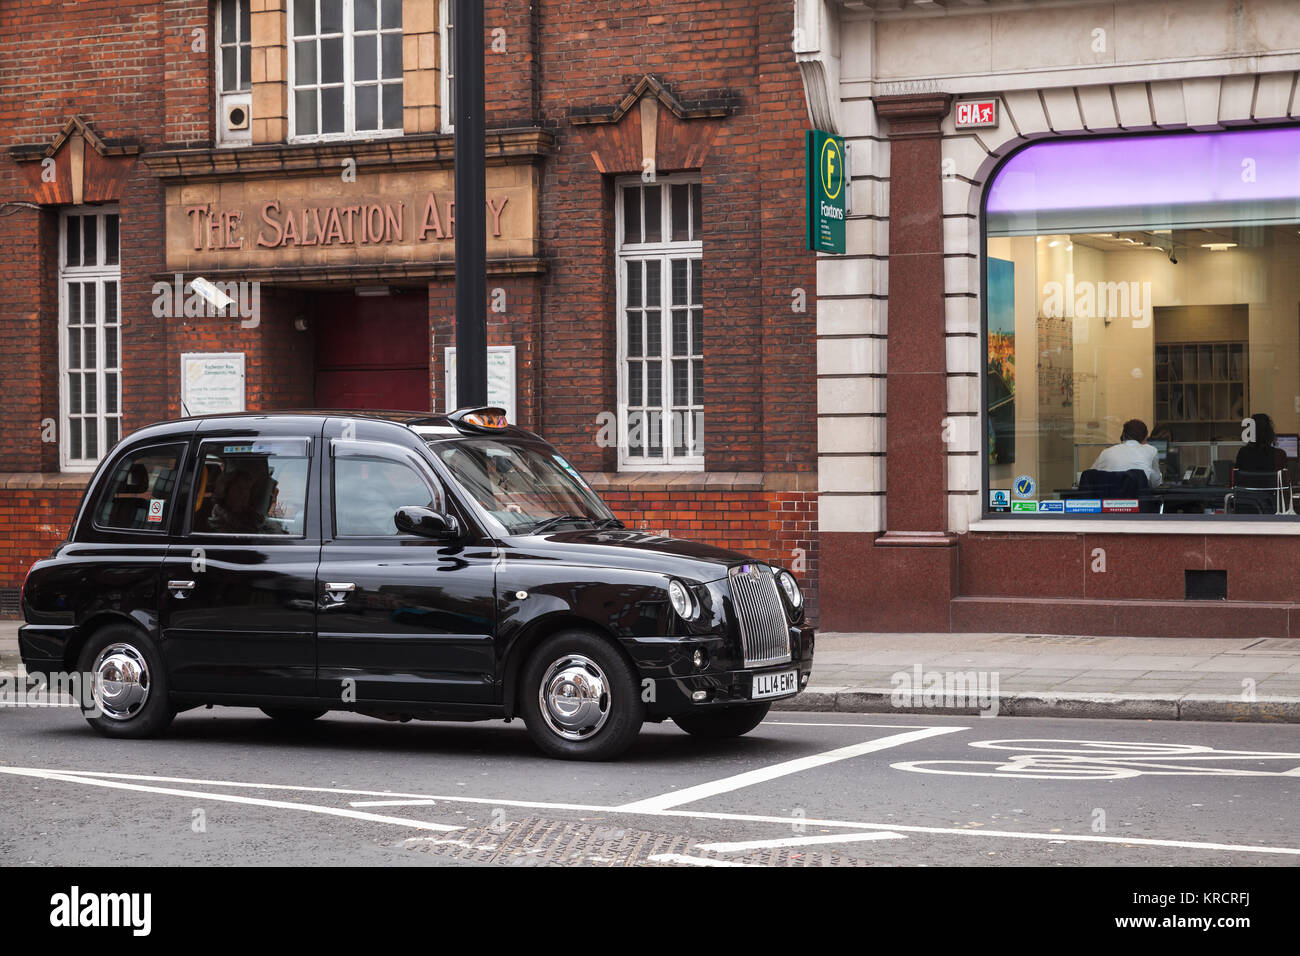 London, United Kingdom - October 31, 2017: Black taxi cab by The London Taxi Company is on the street Stock Photo